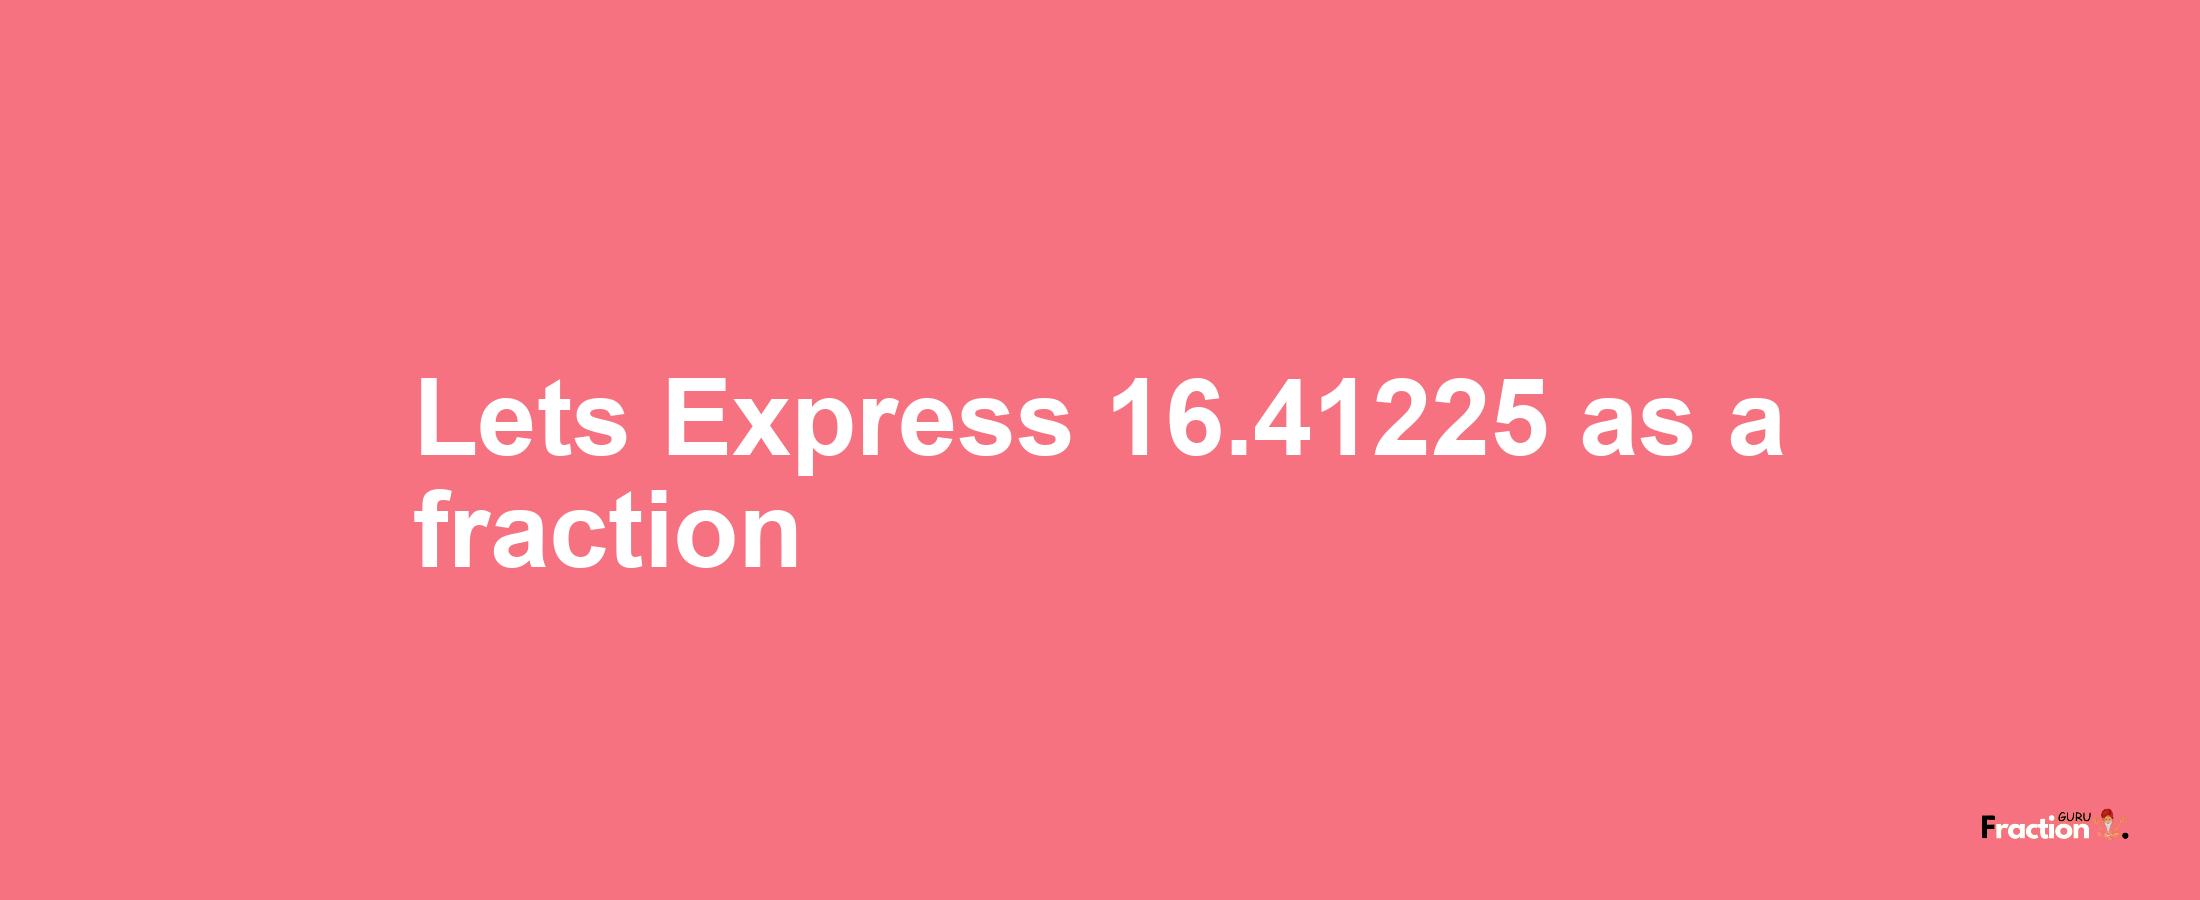 Lets Express 16.41225 as afraction